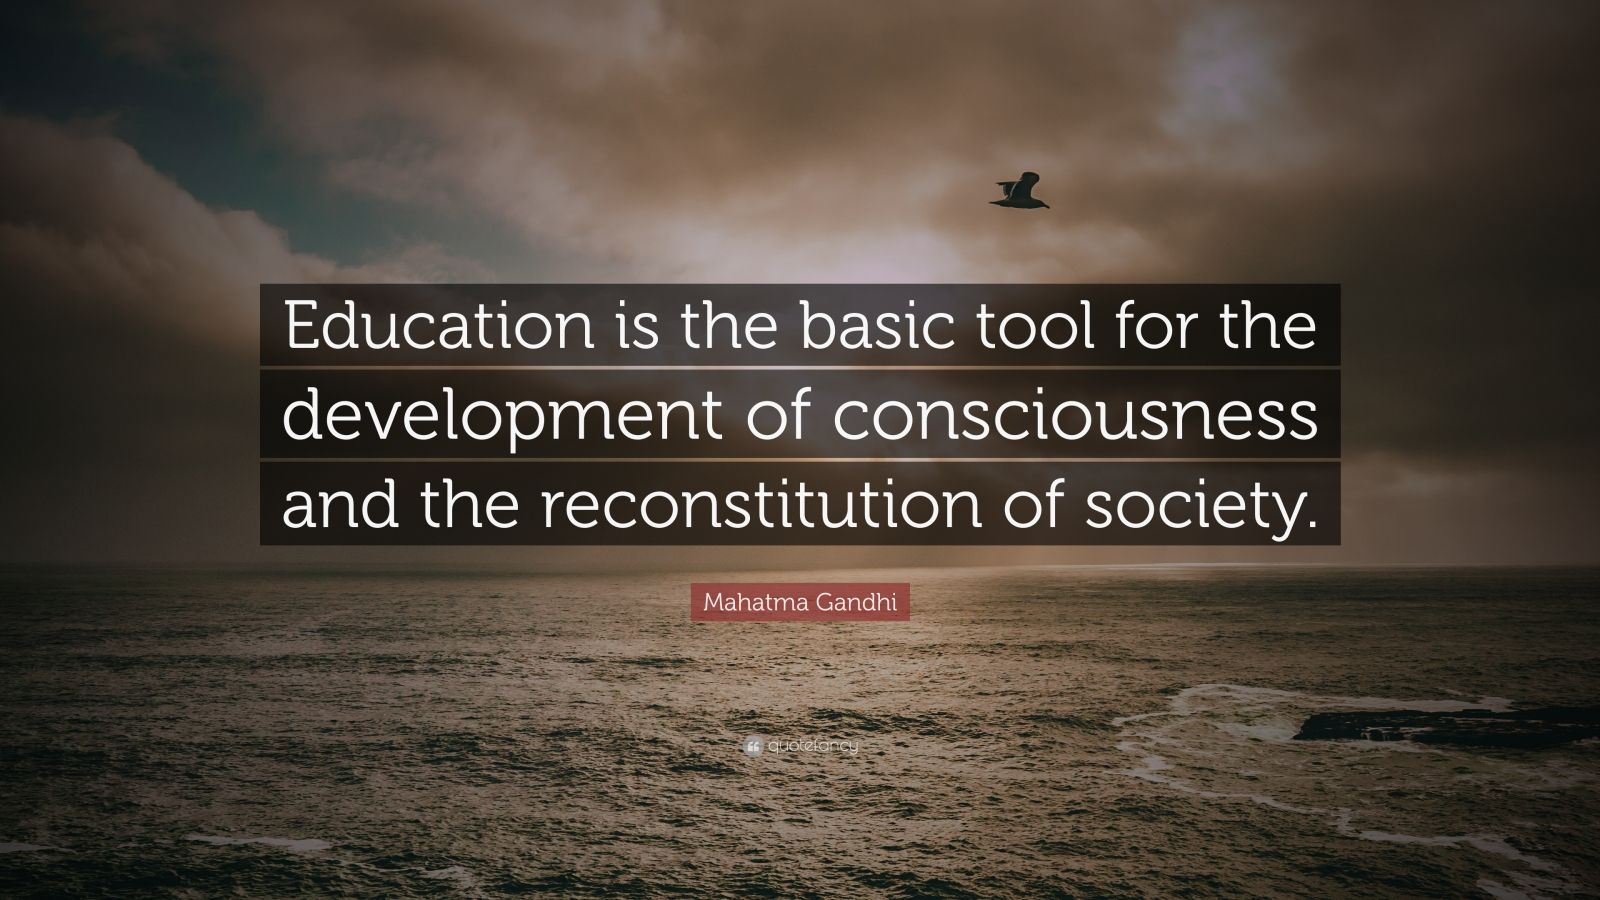 Mahatma Gandhi Quote: “Education is the basic tool for the development